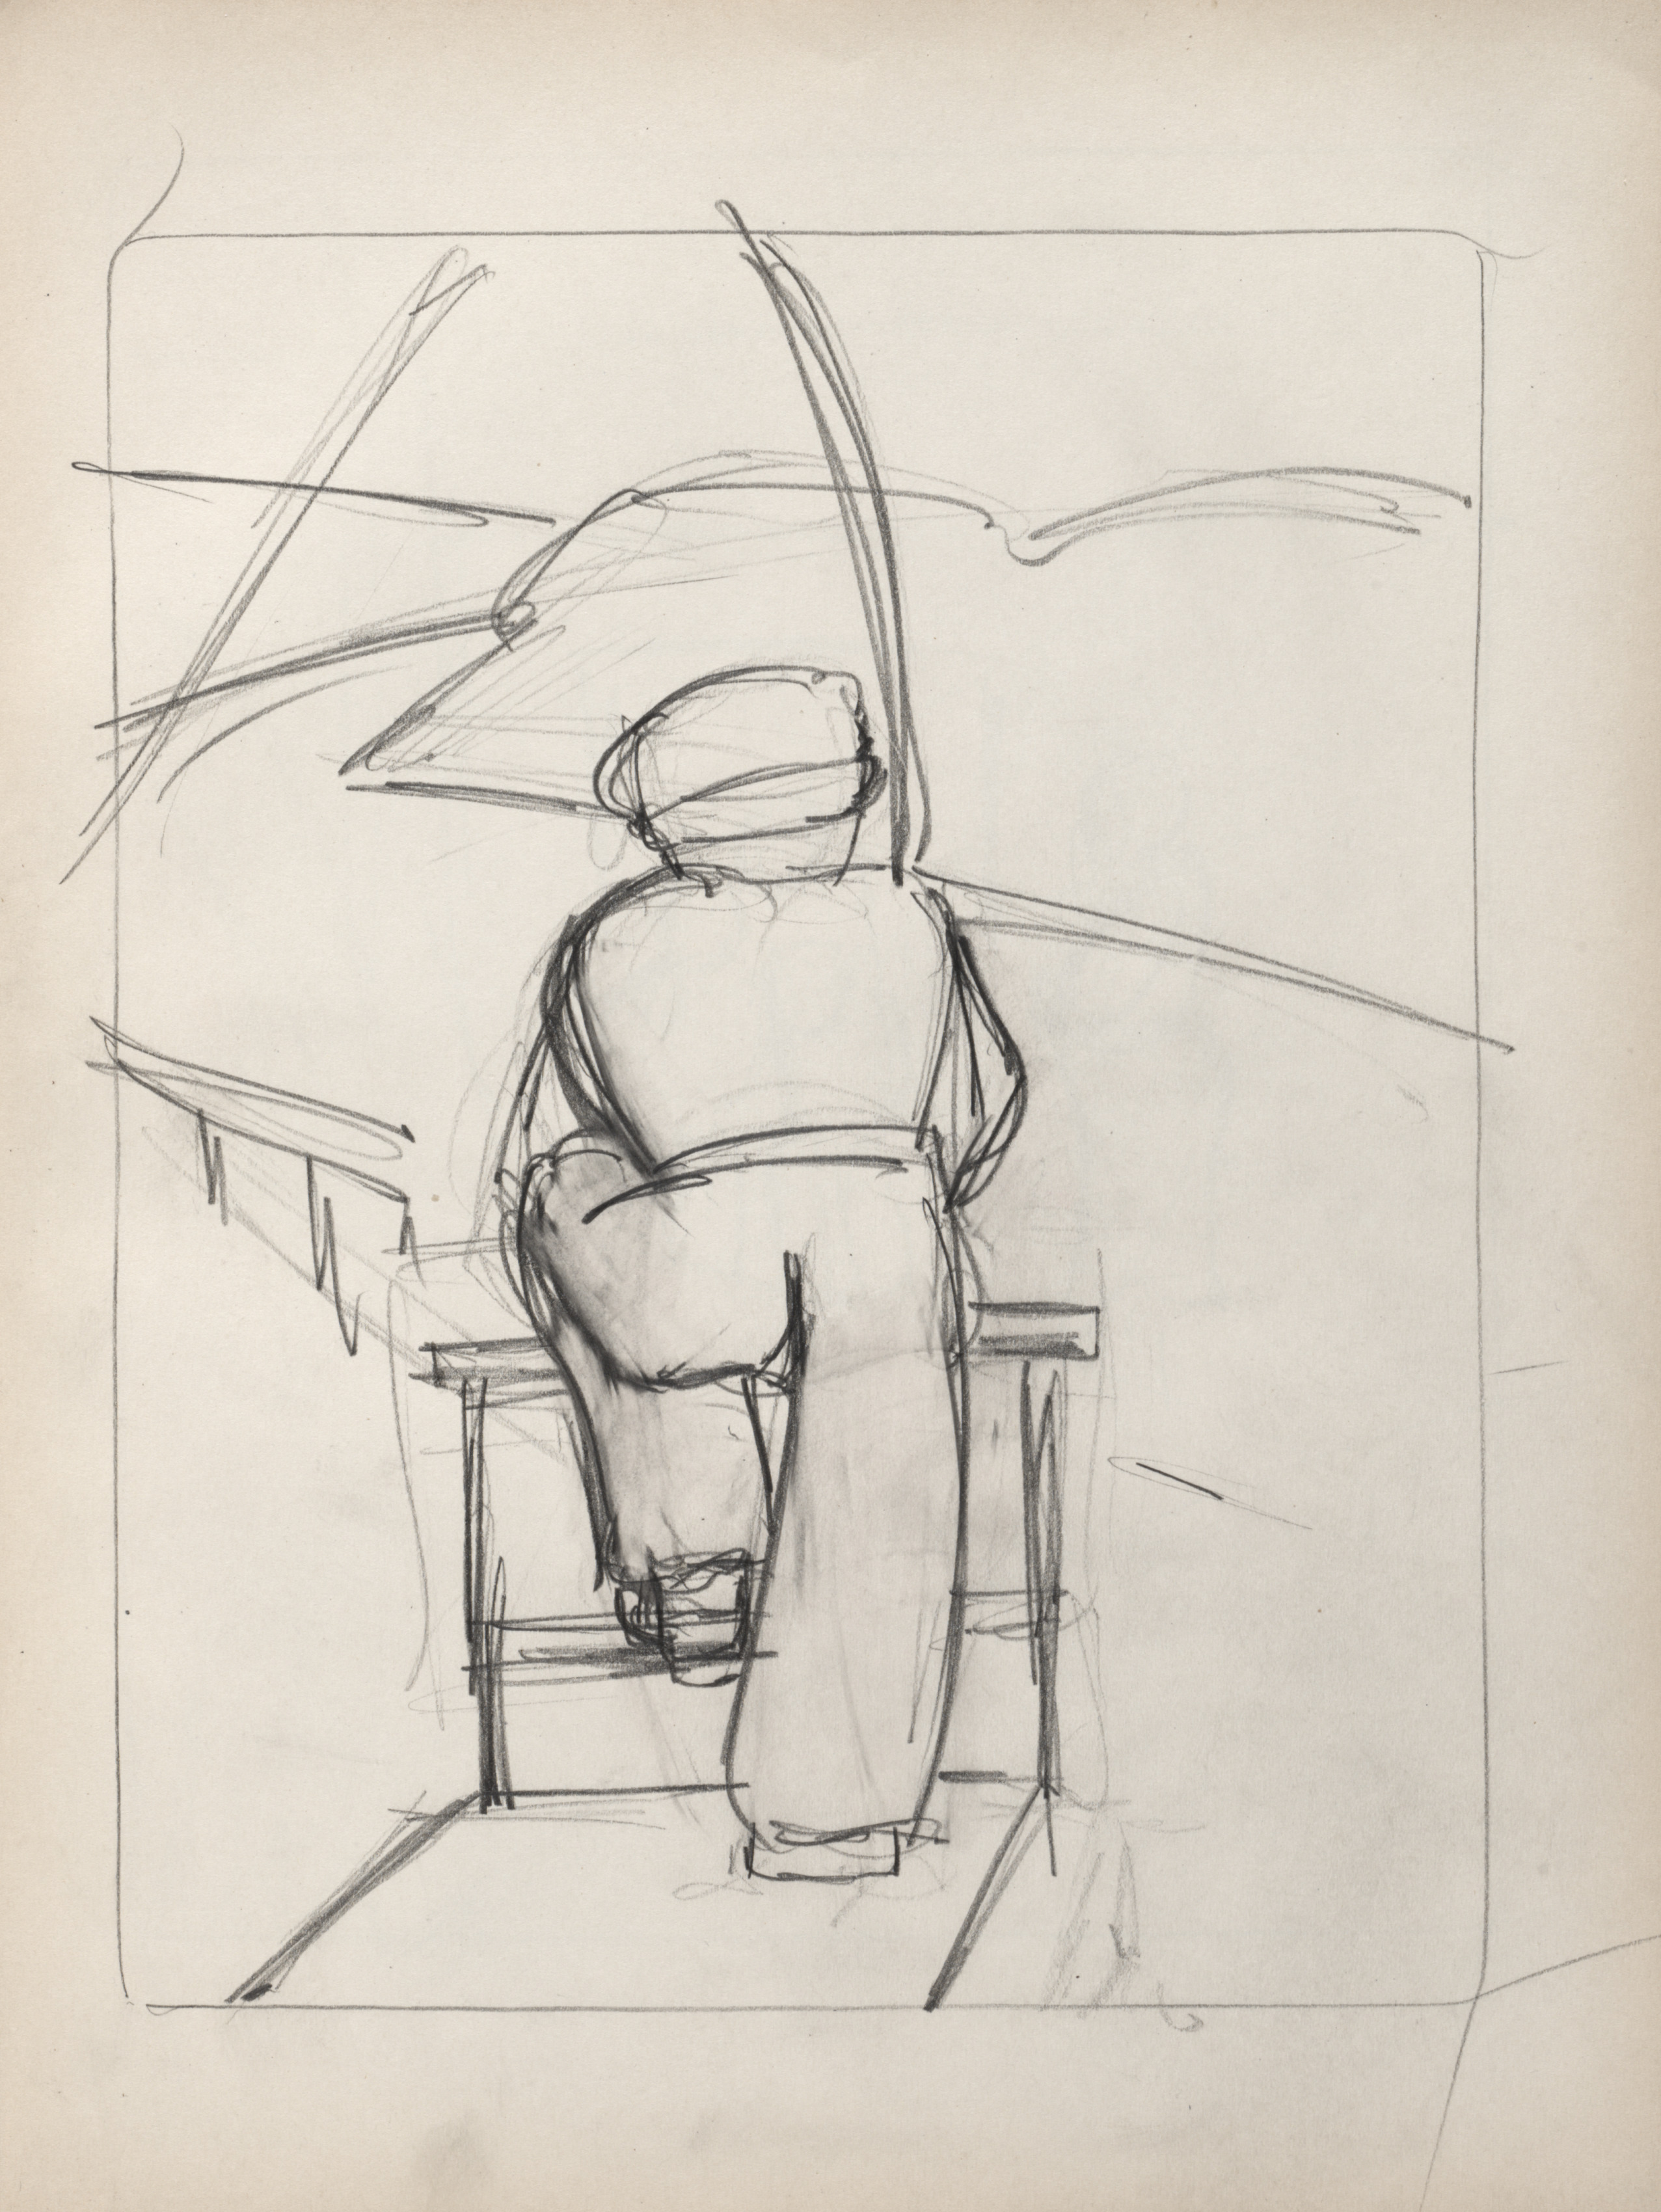 Sketchbook No. 2, page 31: Fisherman on a Pier